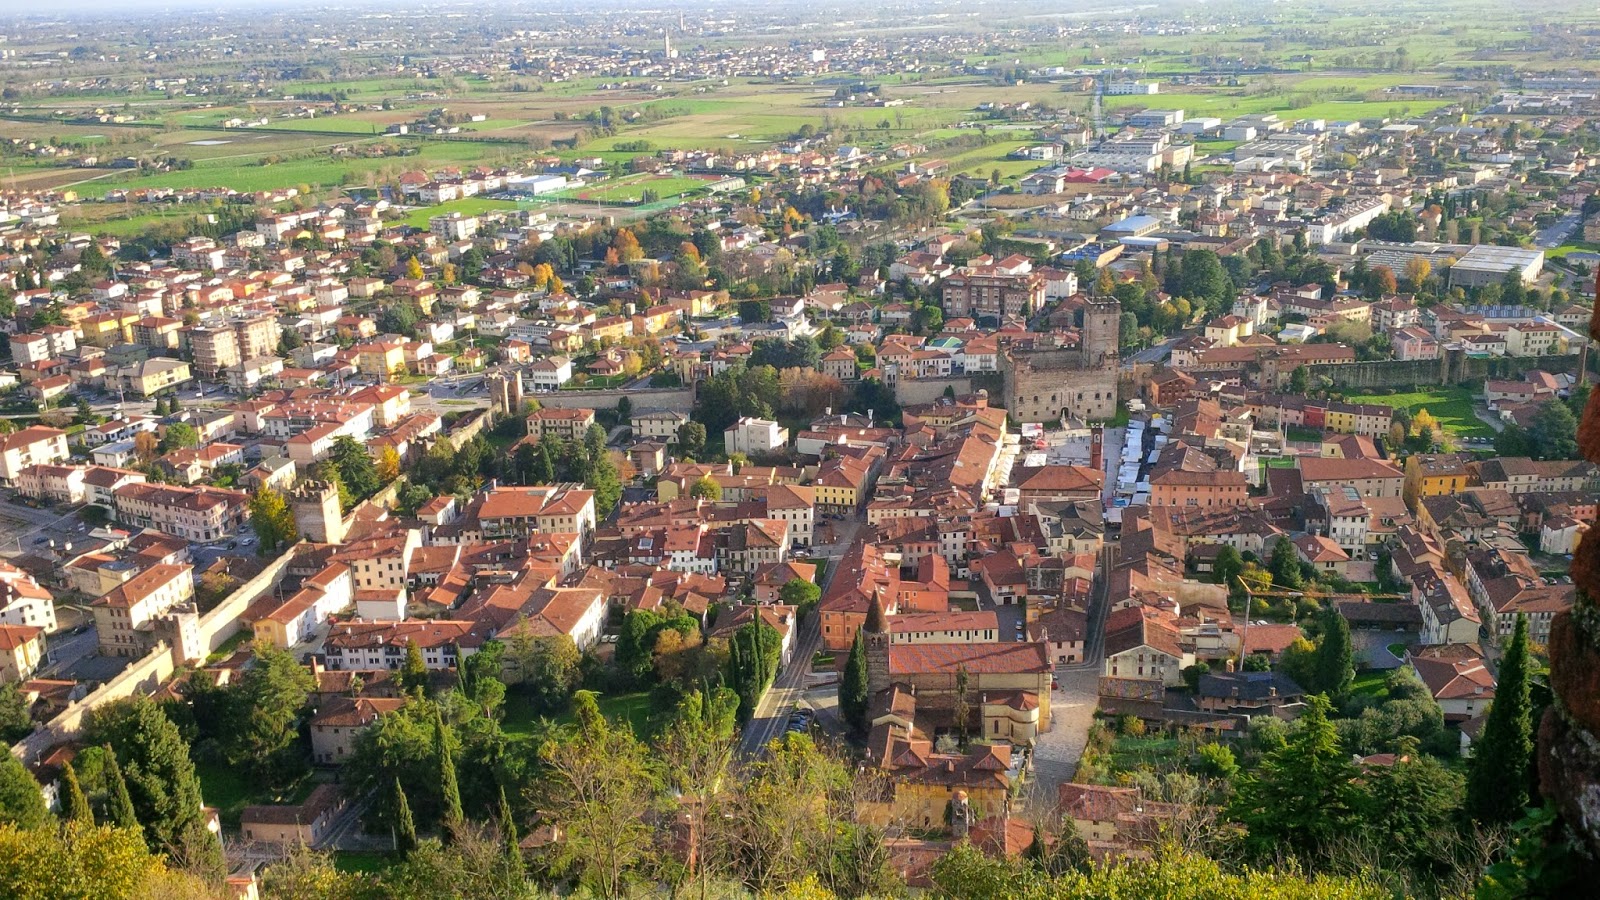 The walled town of Marostica and the plain of Veneto beyond it